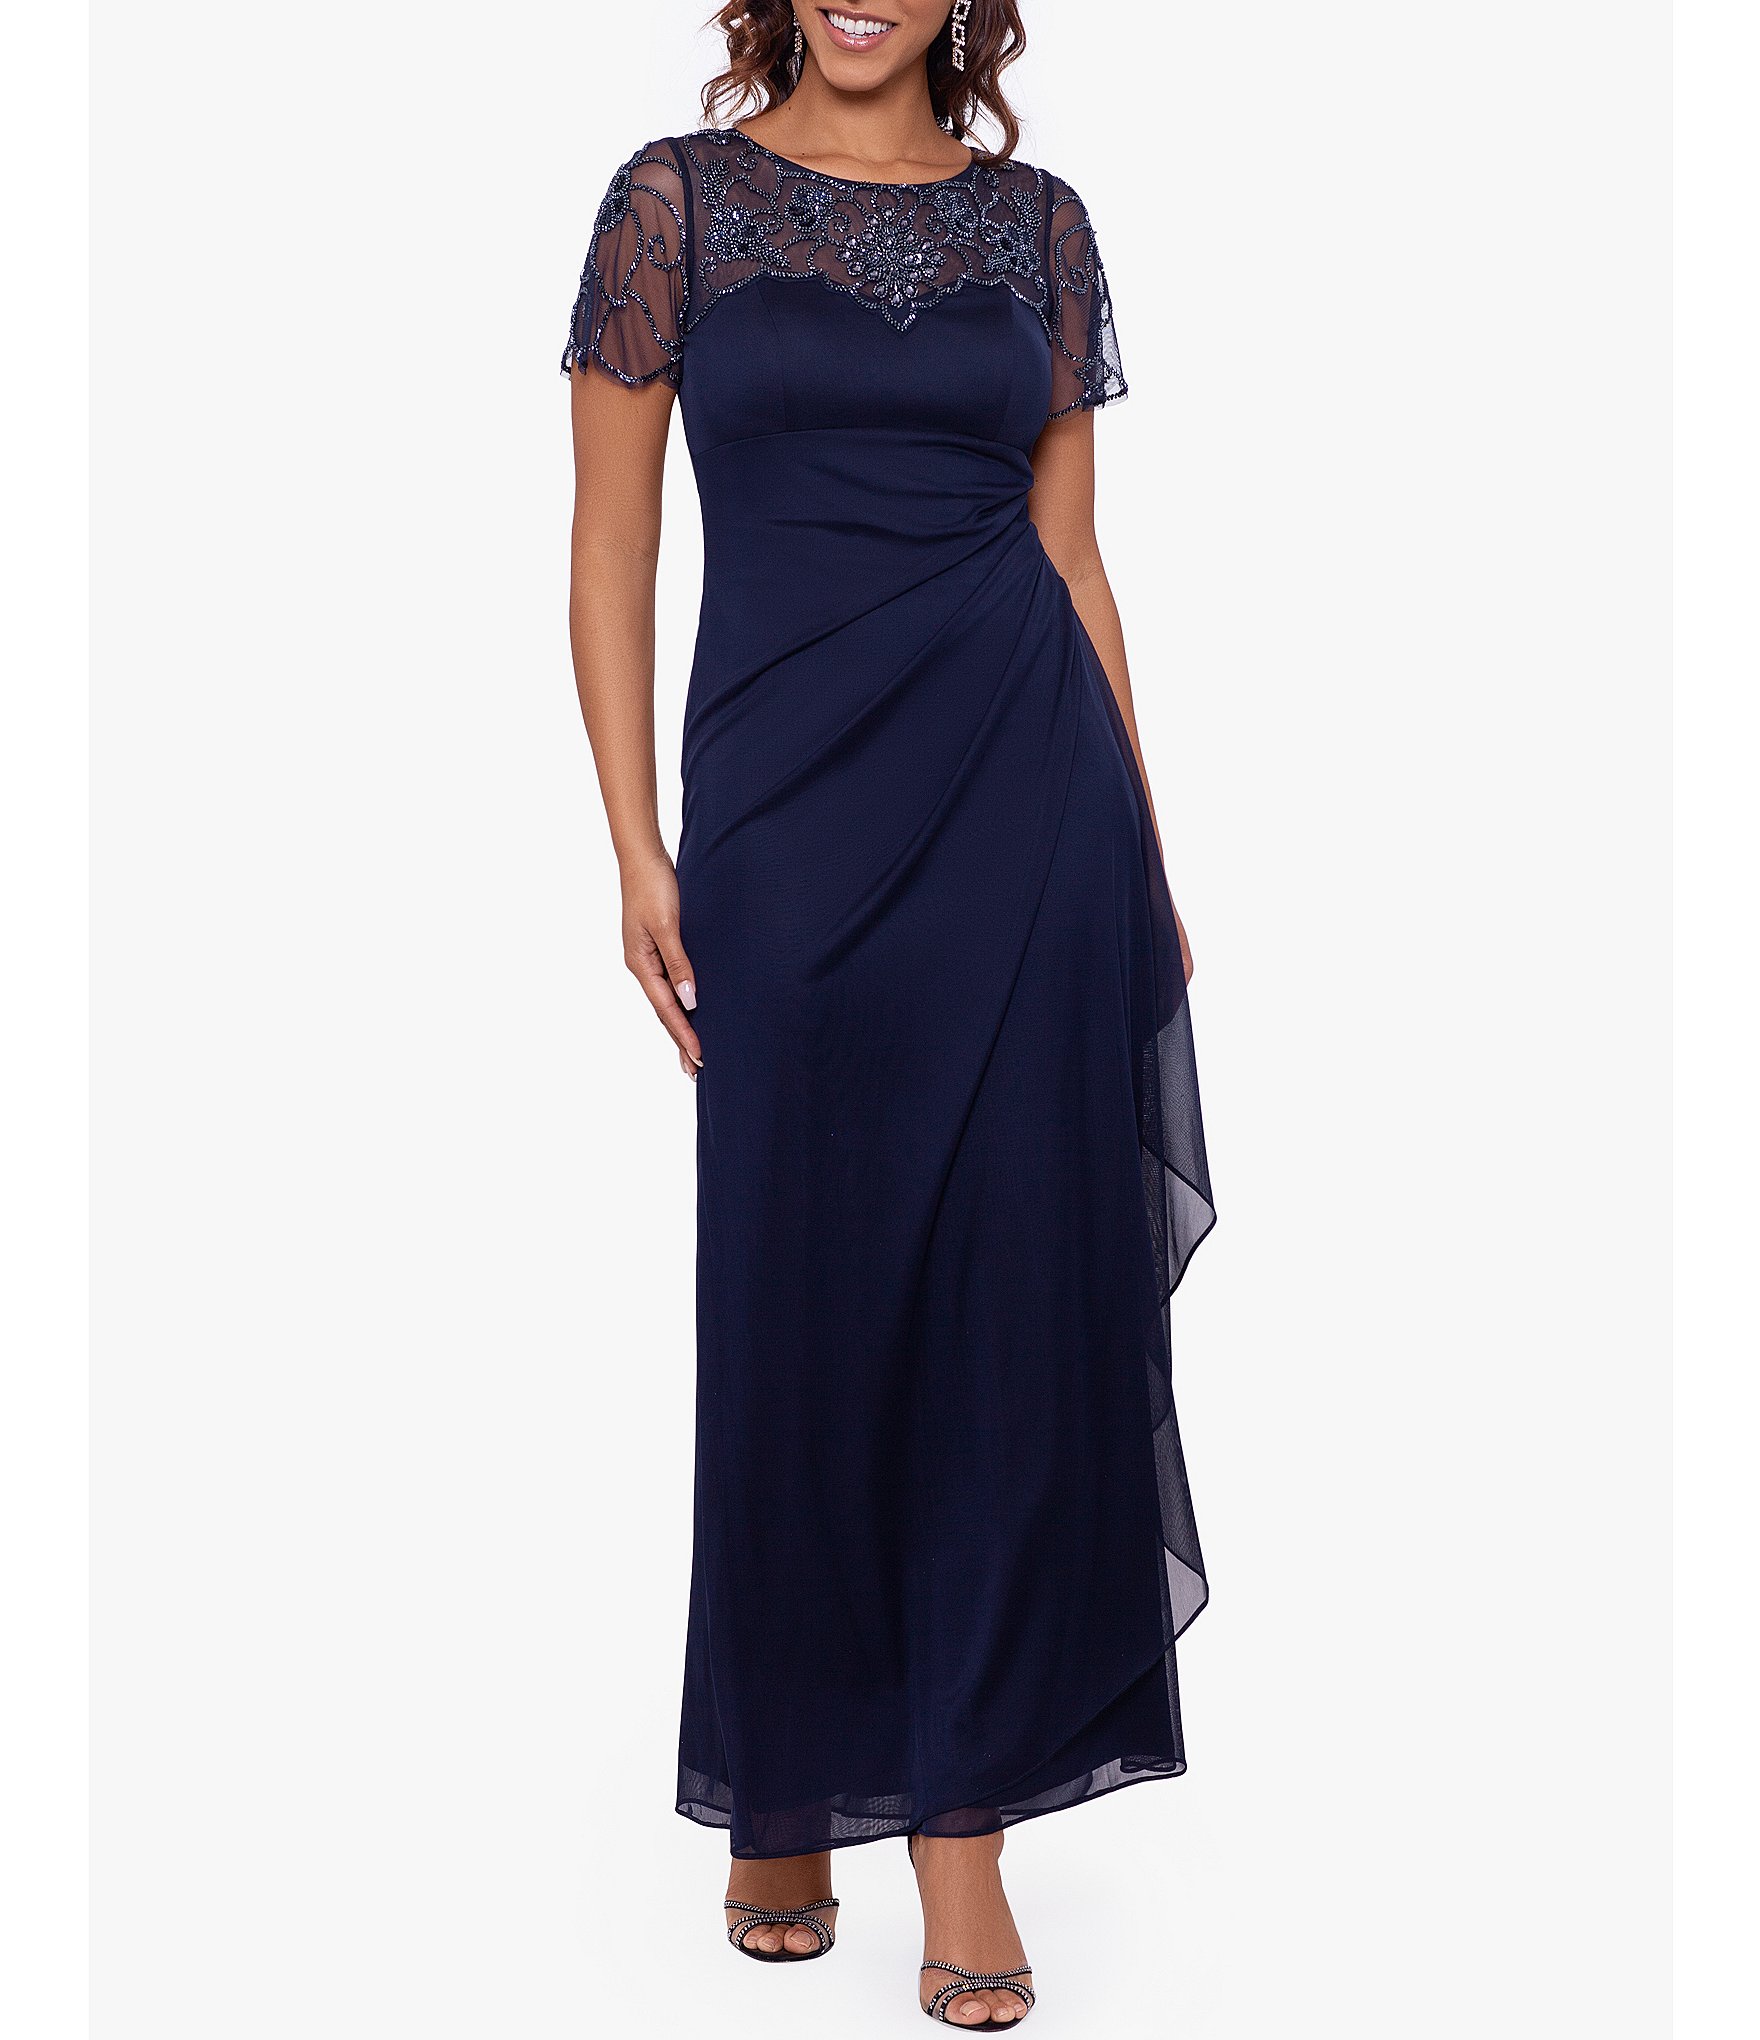 Dark Blue Mother of the Bride Dresses - Dress for the Wedding